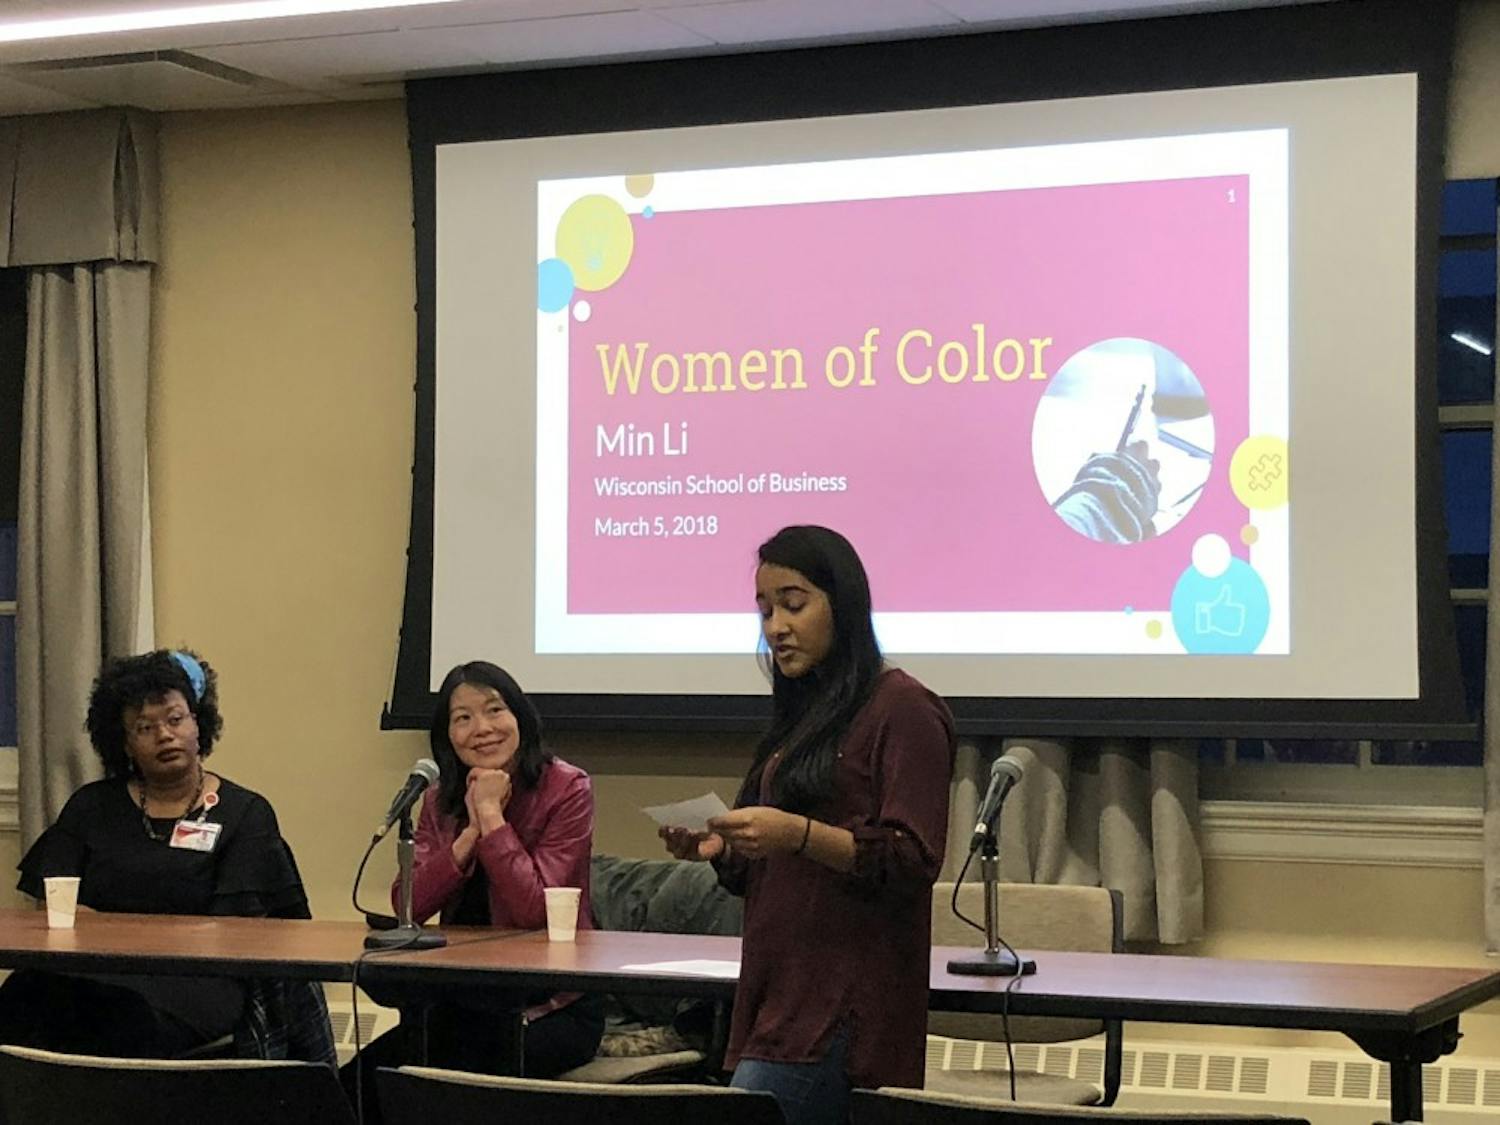 UW-Madison School of Medicine diversity outreach and communications manager Beverly Hutcherson and Wisconsin School of Business professor Min Li spoke at Memorial Union Monday about&nbsp;their experiences as women of color in their fields.